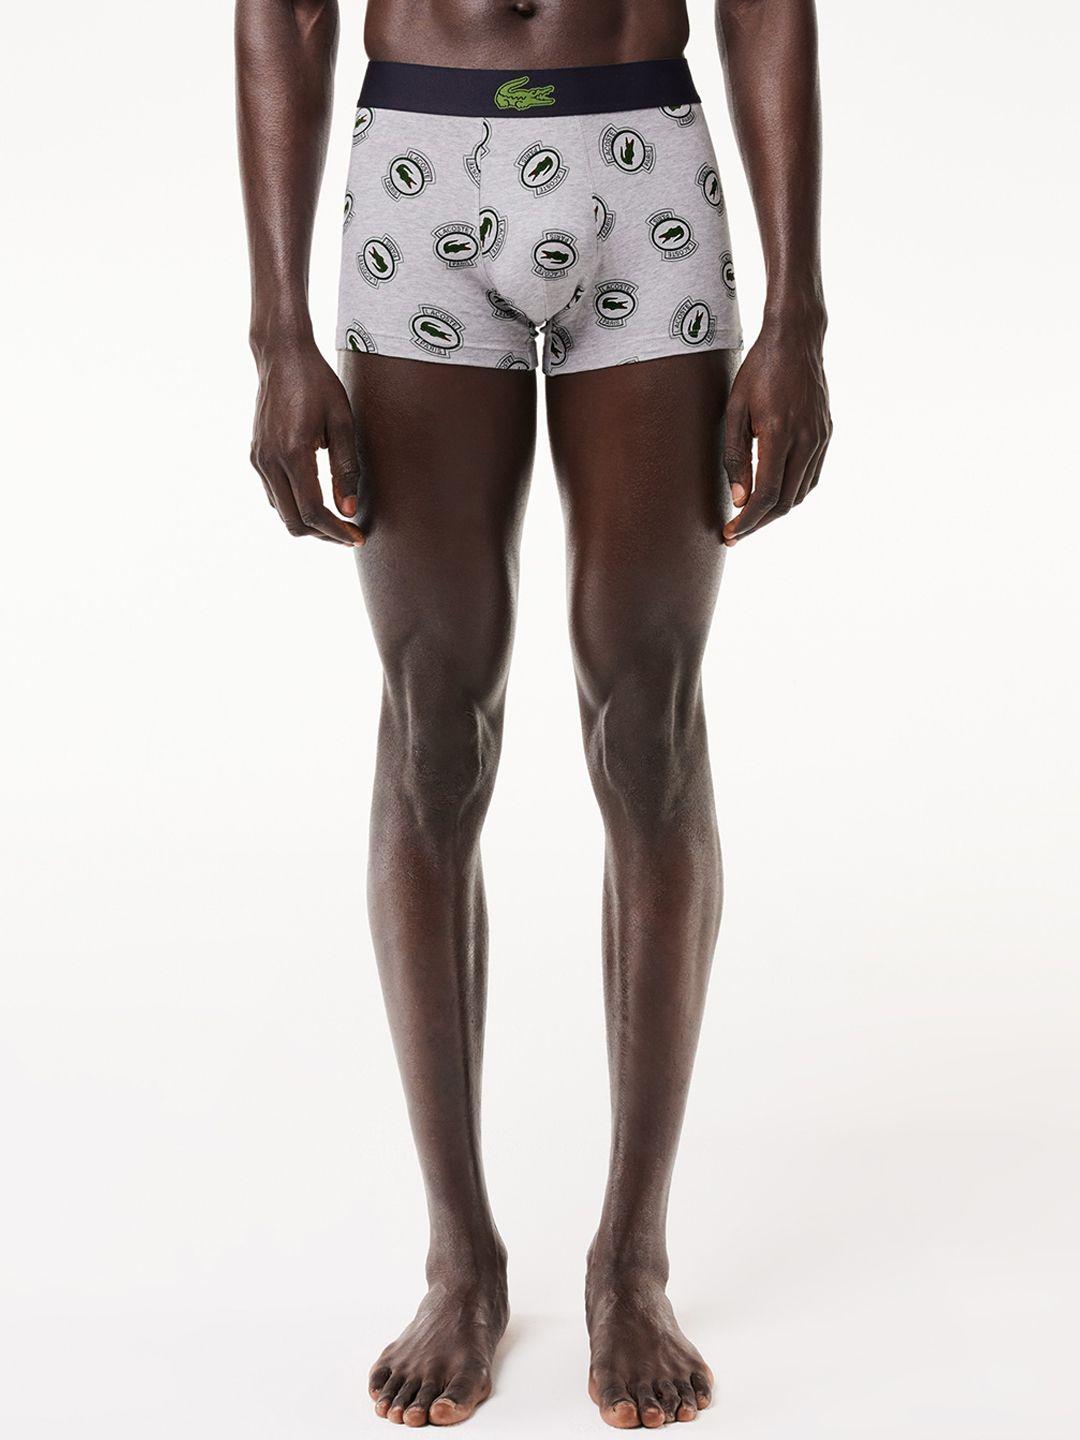 lacoste-stretch-jersey-printed-ultra-comfortable-trunks-5h8396w9d-s